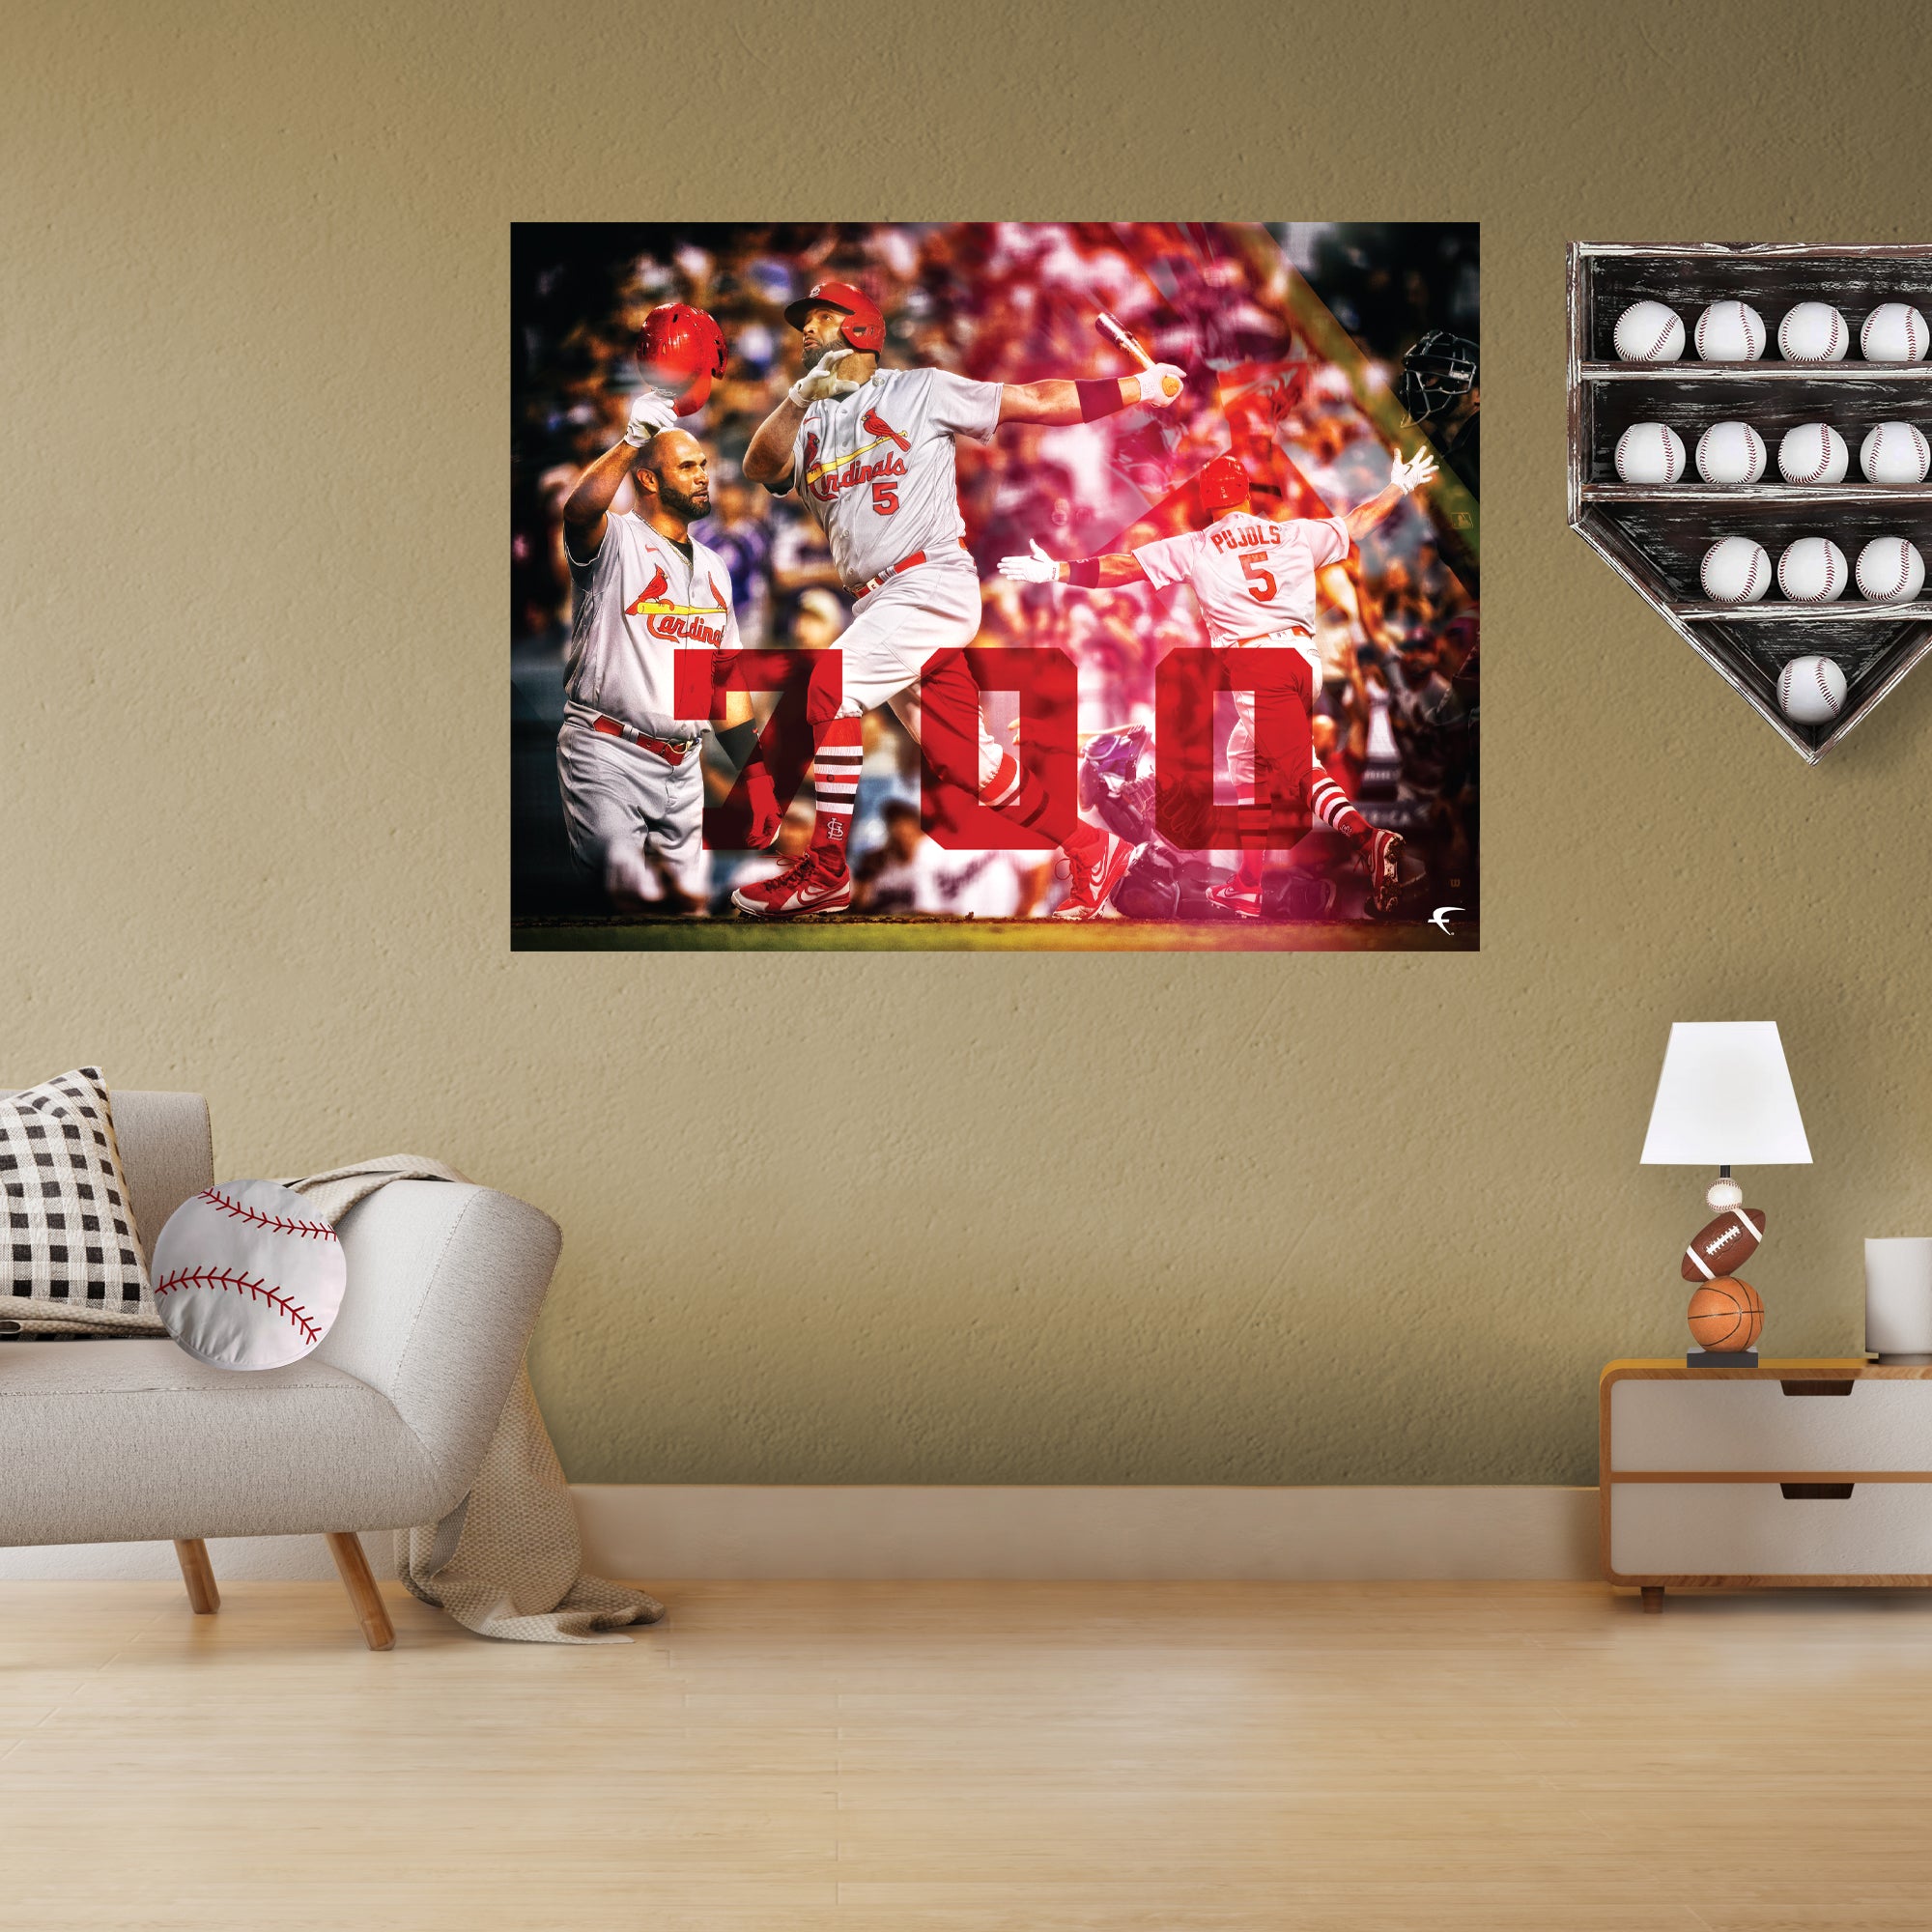  Albert Pujols Baseball Star Drawing Style Poster 7 Canvas  Poster Bedroom Decor Sports Landscape Office Room Decor Gift Frame:  24x36inch(60x90cm): Posters & Prints